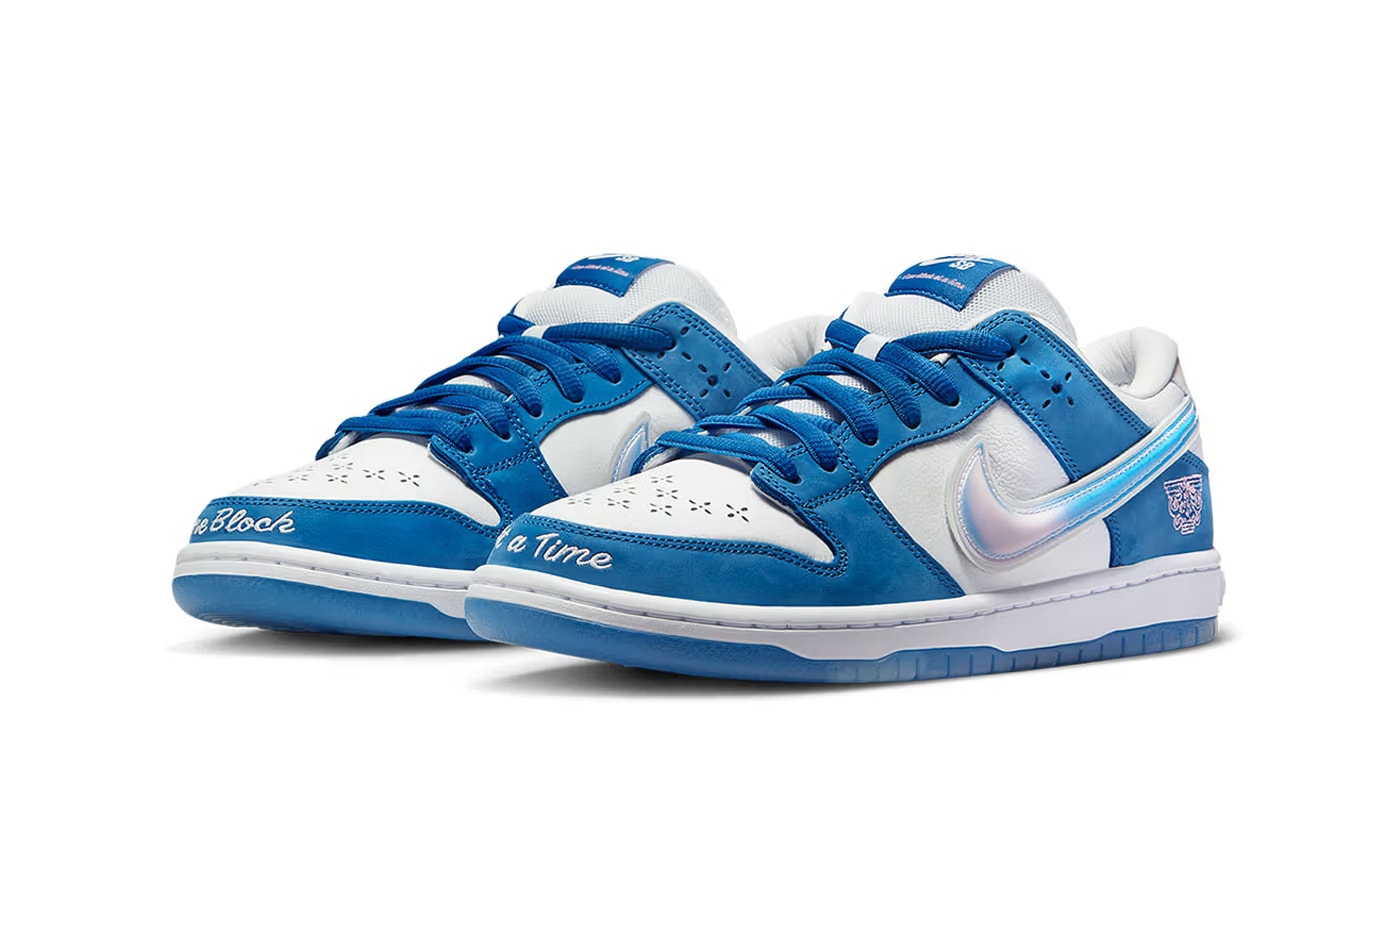 Buy Nike SB: The Dunk Book Book Online at Low Prices in India